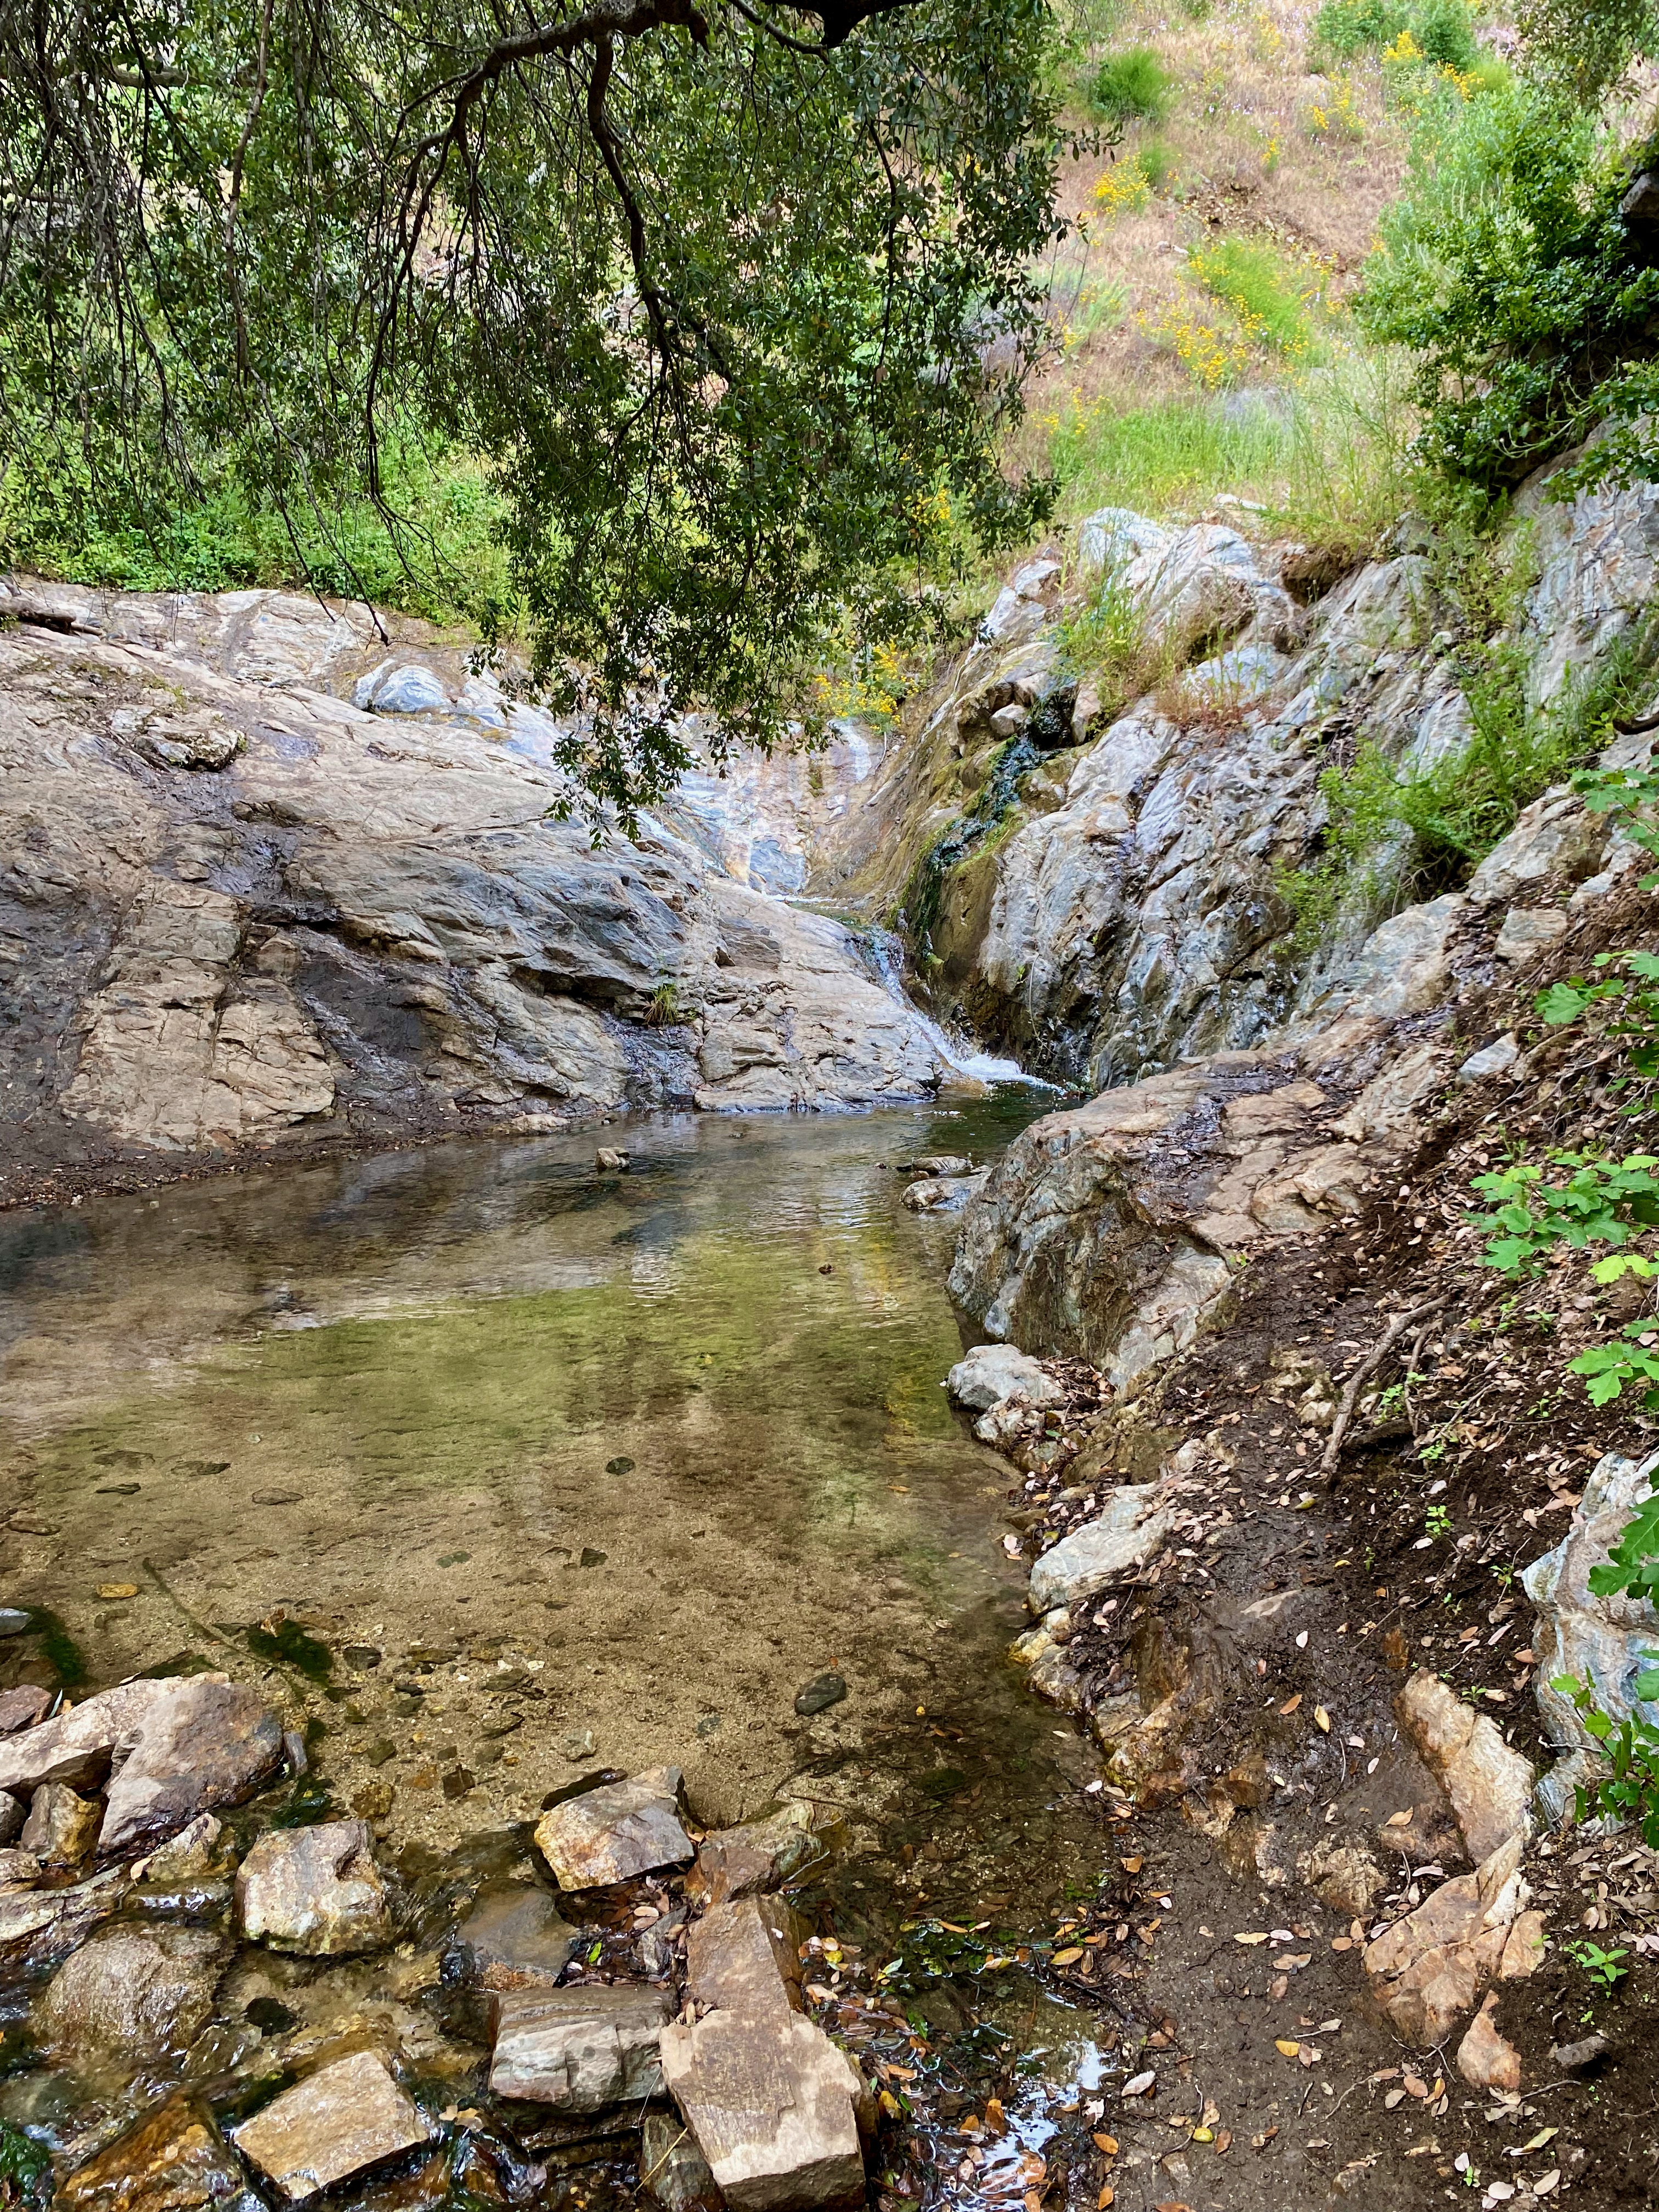 One of the wet creek crossings along the Waterfall trail in Placerita Canyon.